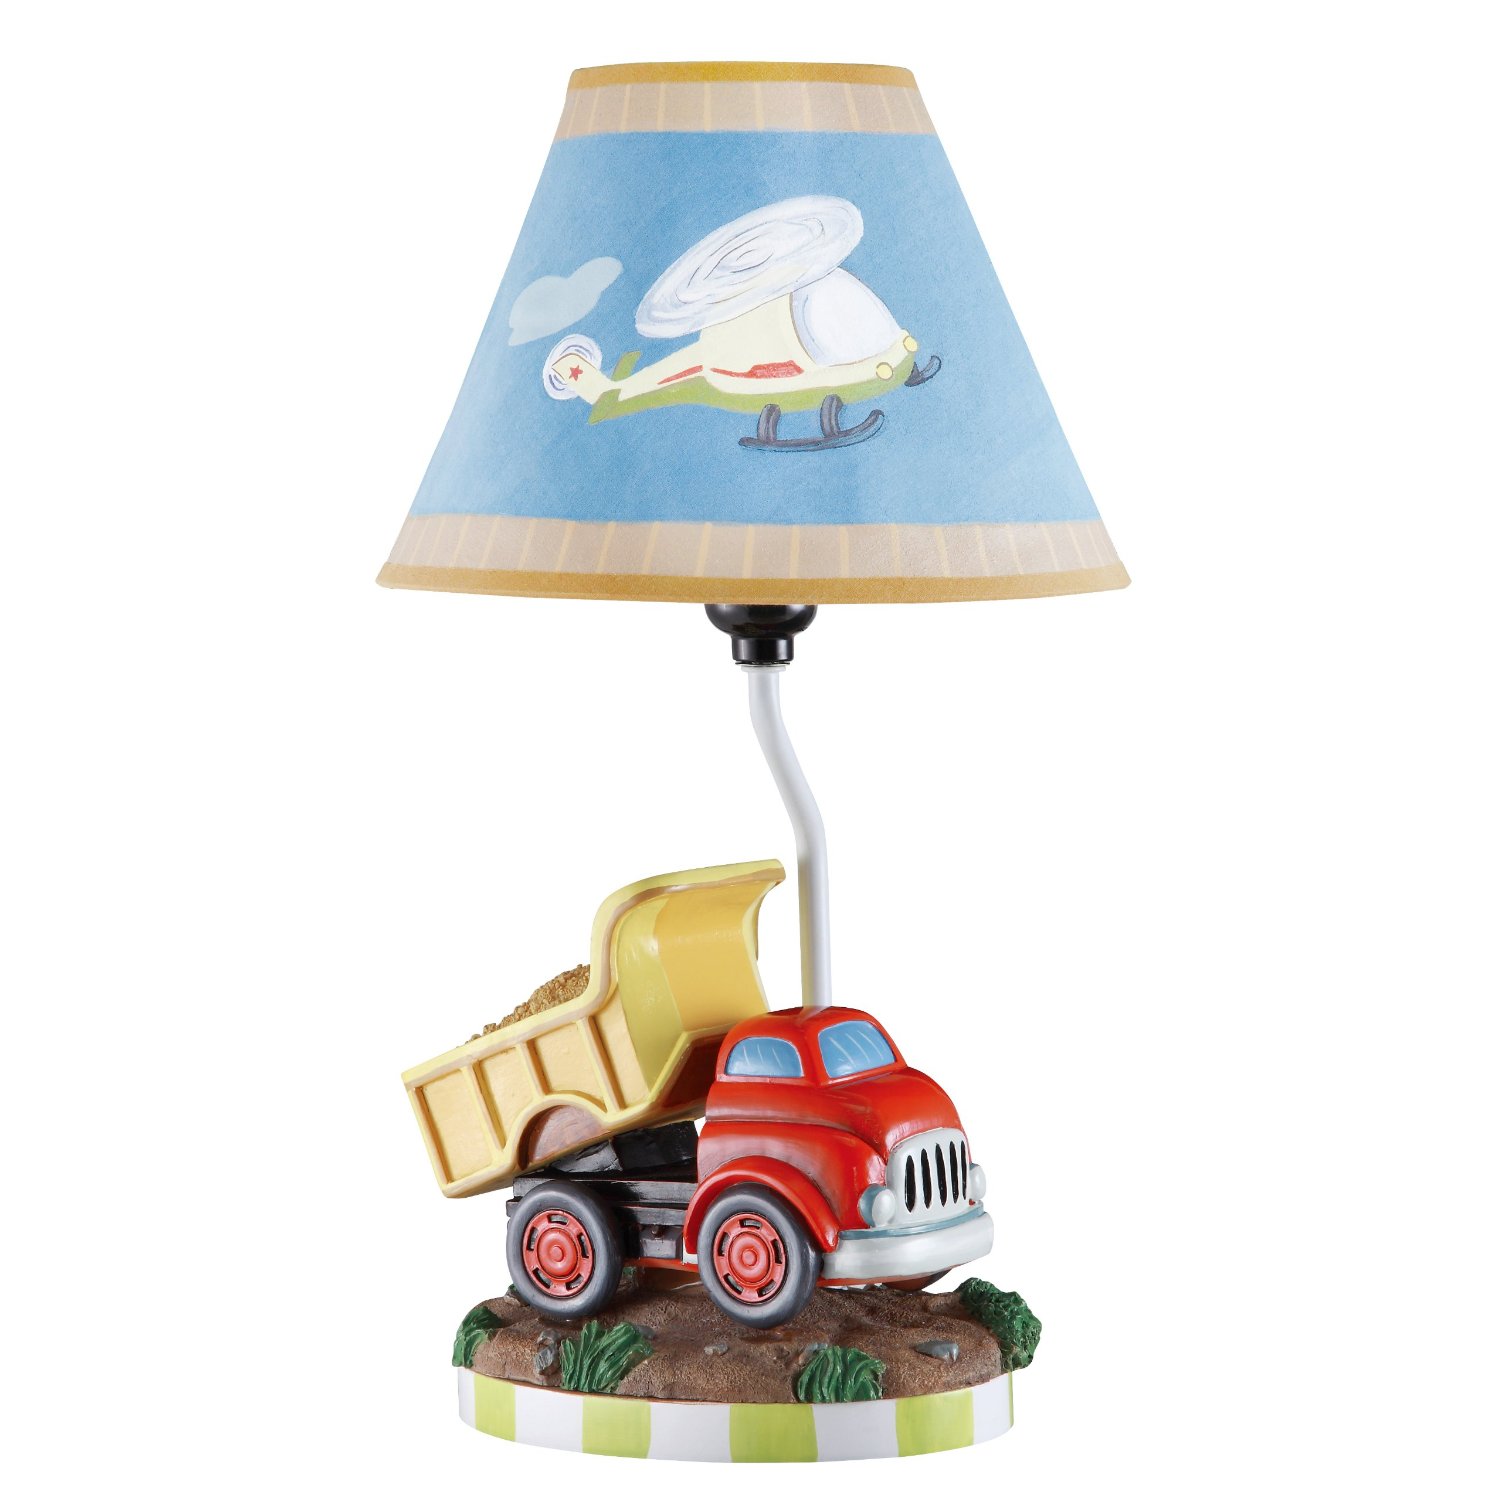 Cute lamps For Kids Rooms Lighting | Interior Decorating Idea